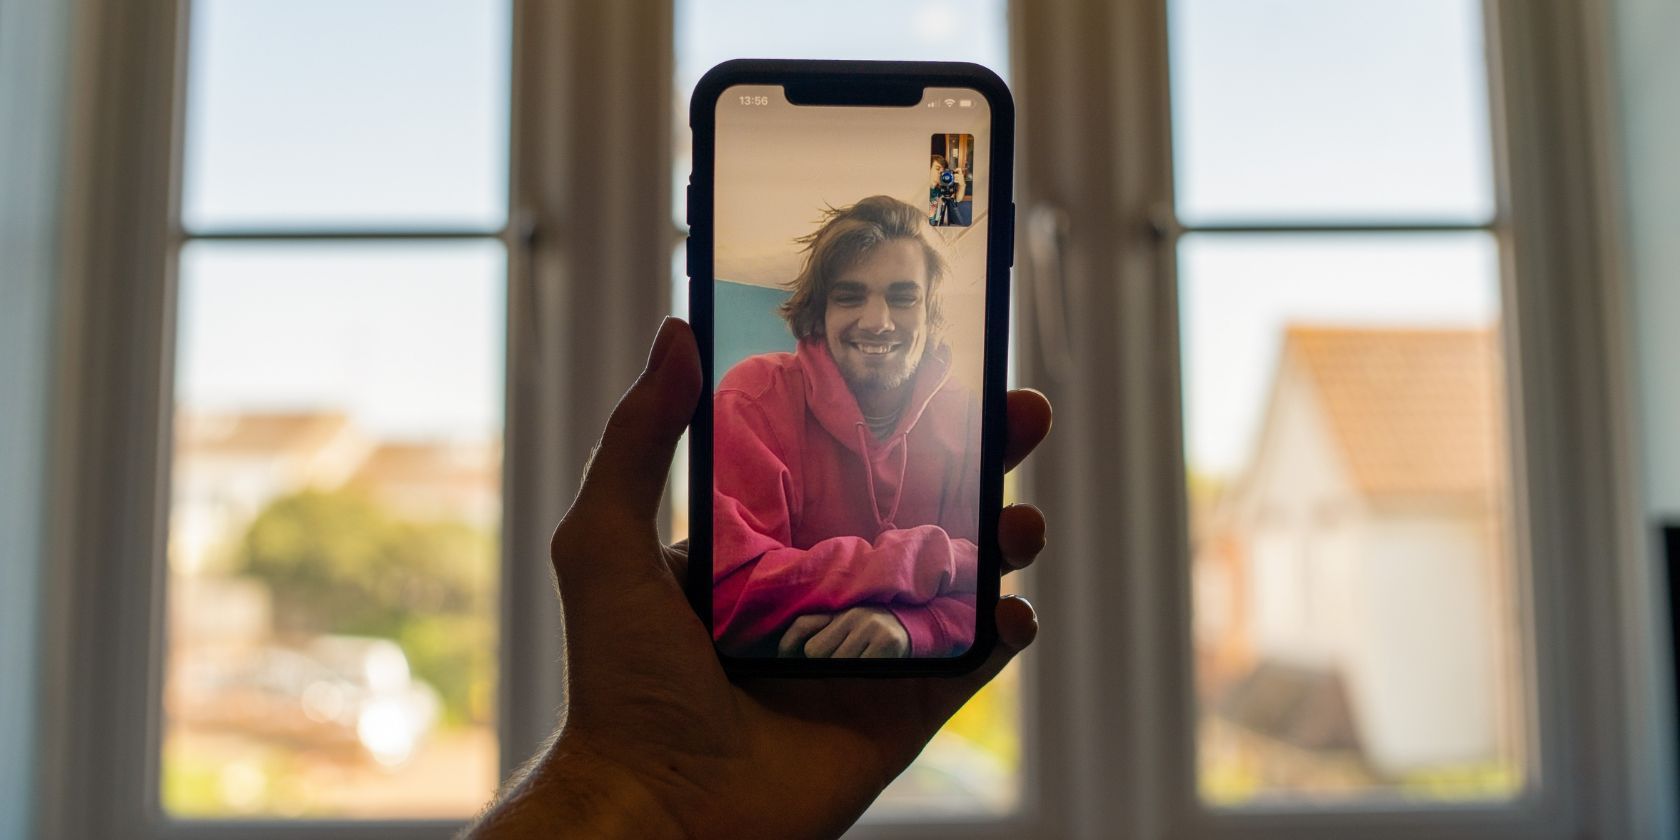 A man holding an iPhone while on a FaceTime video call